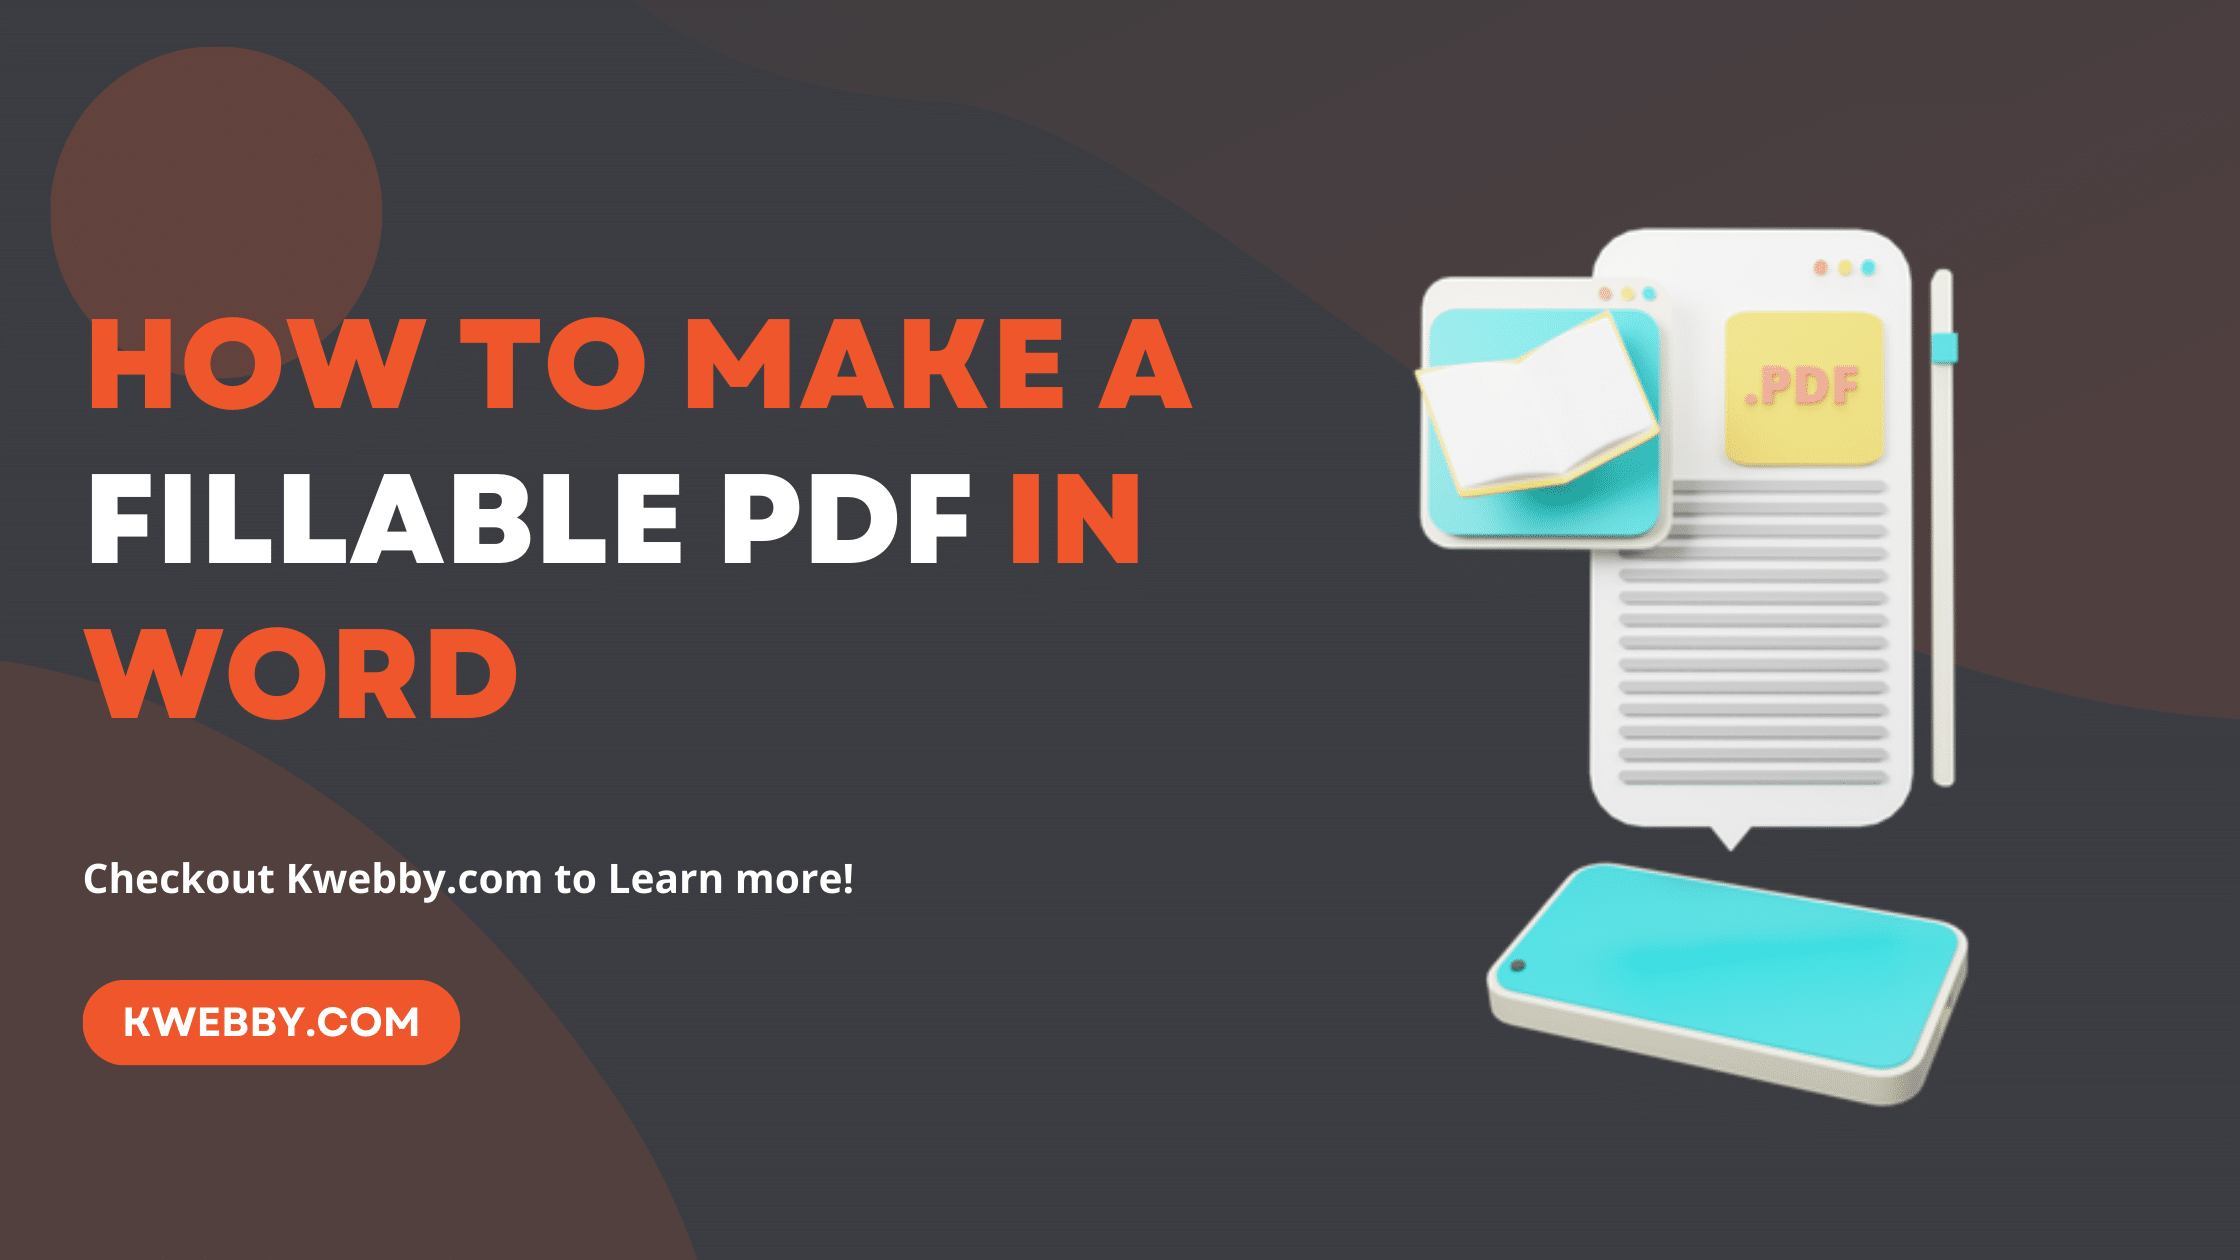 How to Make a Fillable PDF in Word